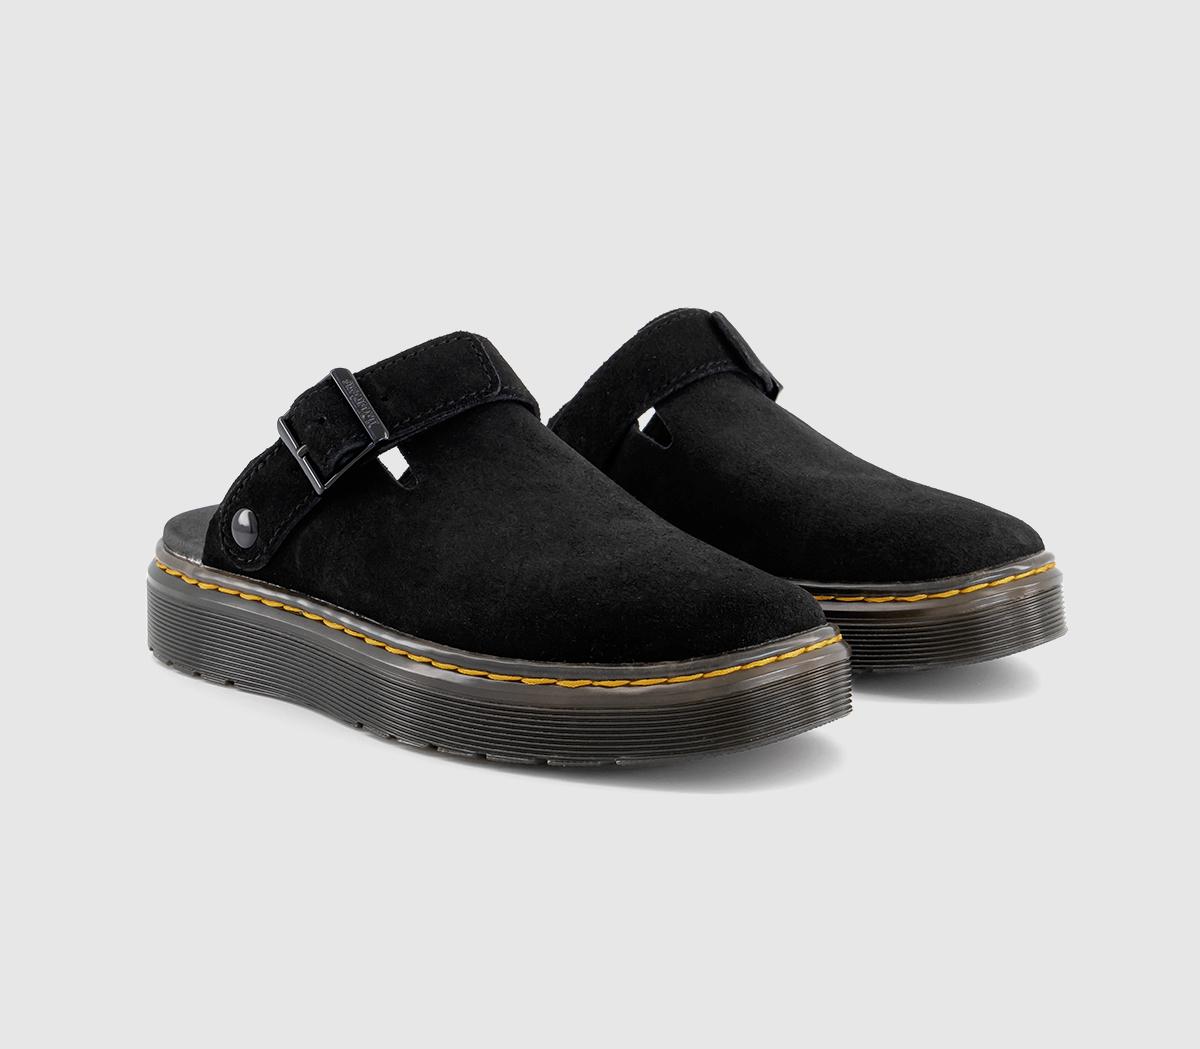 Dr. Martens Womens Carlson Mules Black Suede, 6